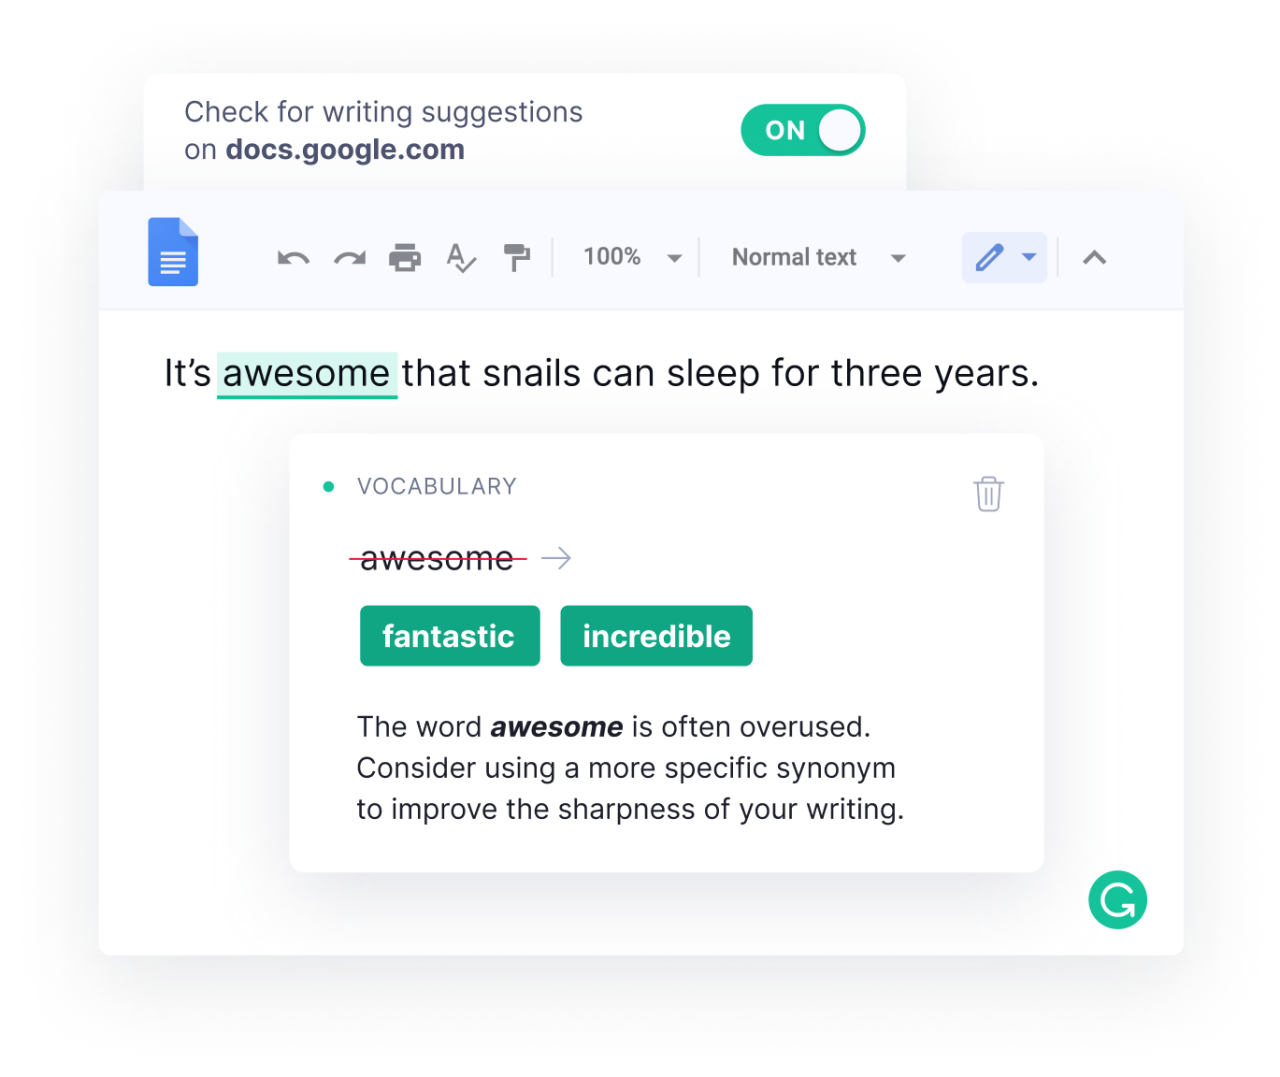 Write clearly and mistake-free in Google Docs with Grammarly's real-time, AI-powered writing assistant.